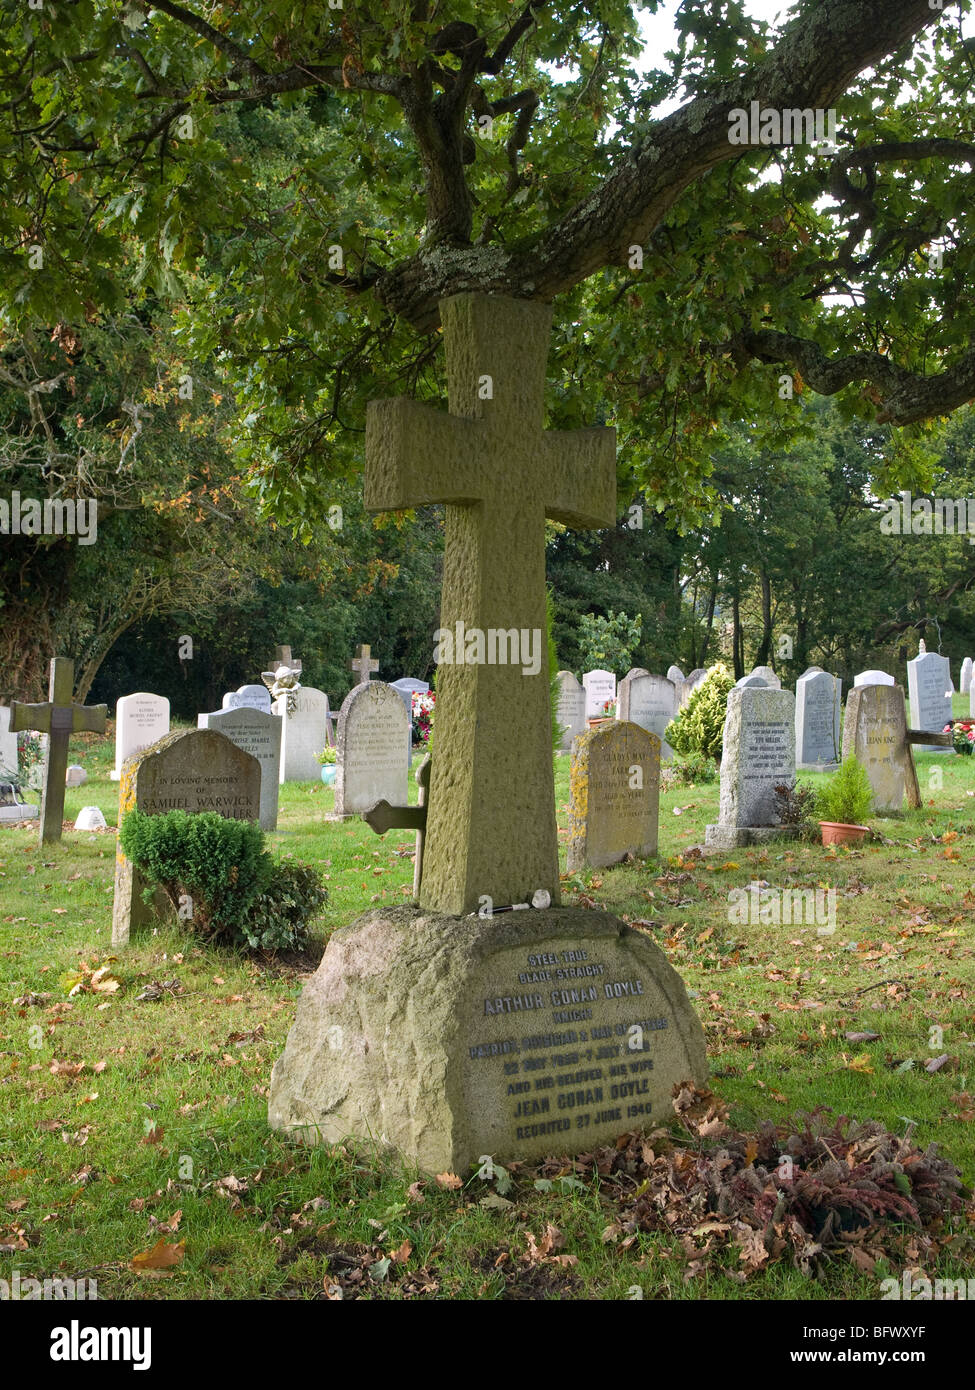 Grave of Sir Arthur Conan Doyle (22 May 1859 - 7 July 1930) and his wife  Minstead Church Hampshire England UK Stock Photo - Alamy